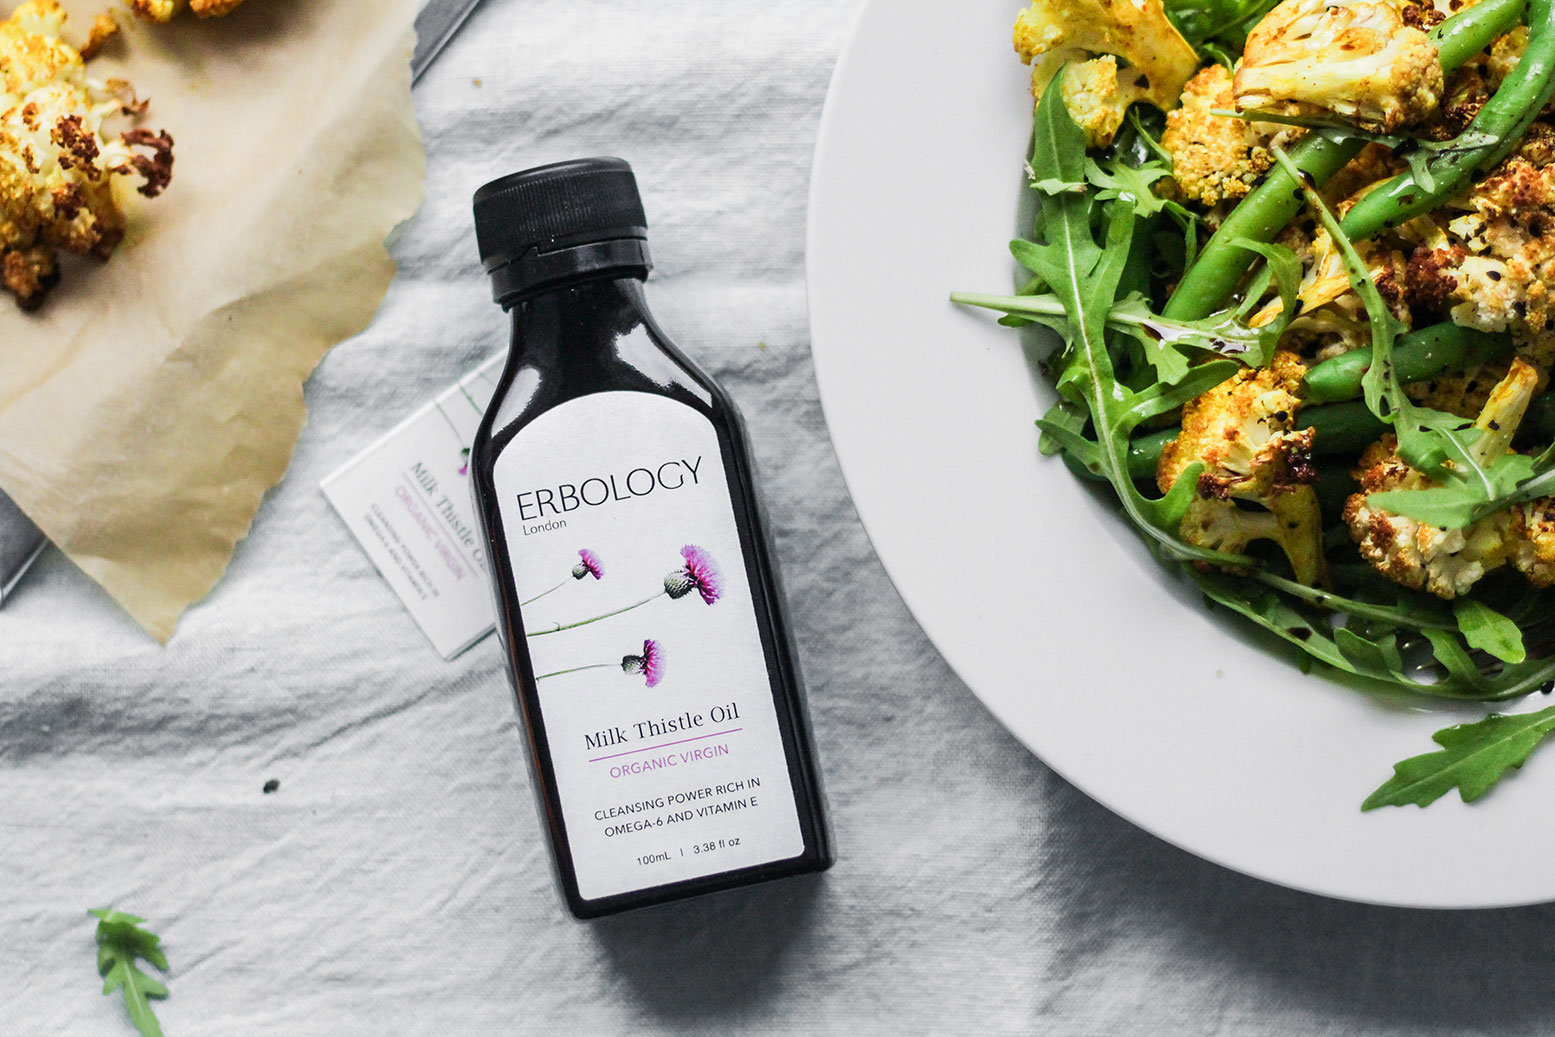 A breakthrough nutrition brand, Erbology joins PepsiCo’s new incubator programme.